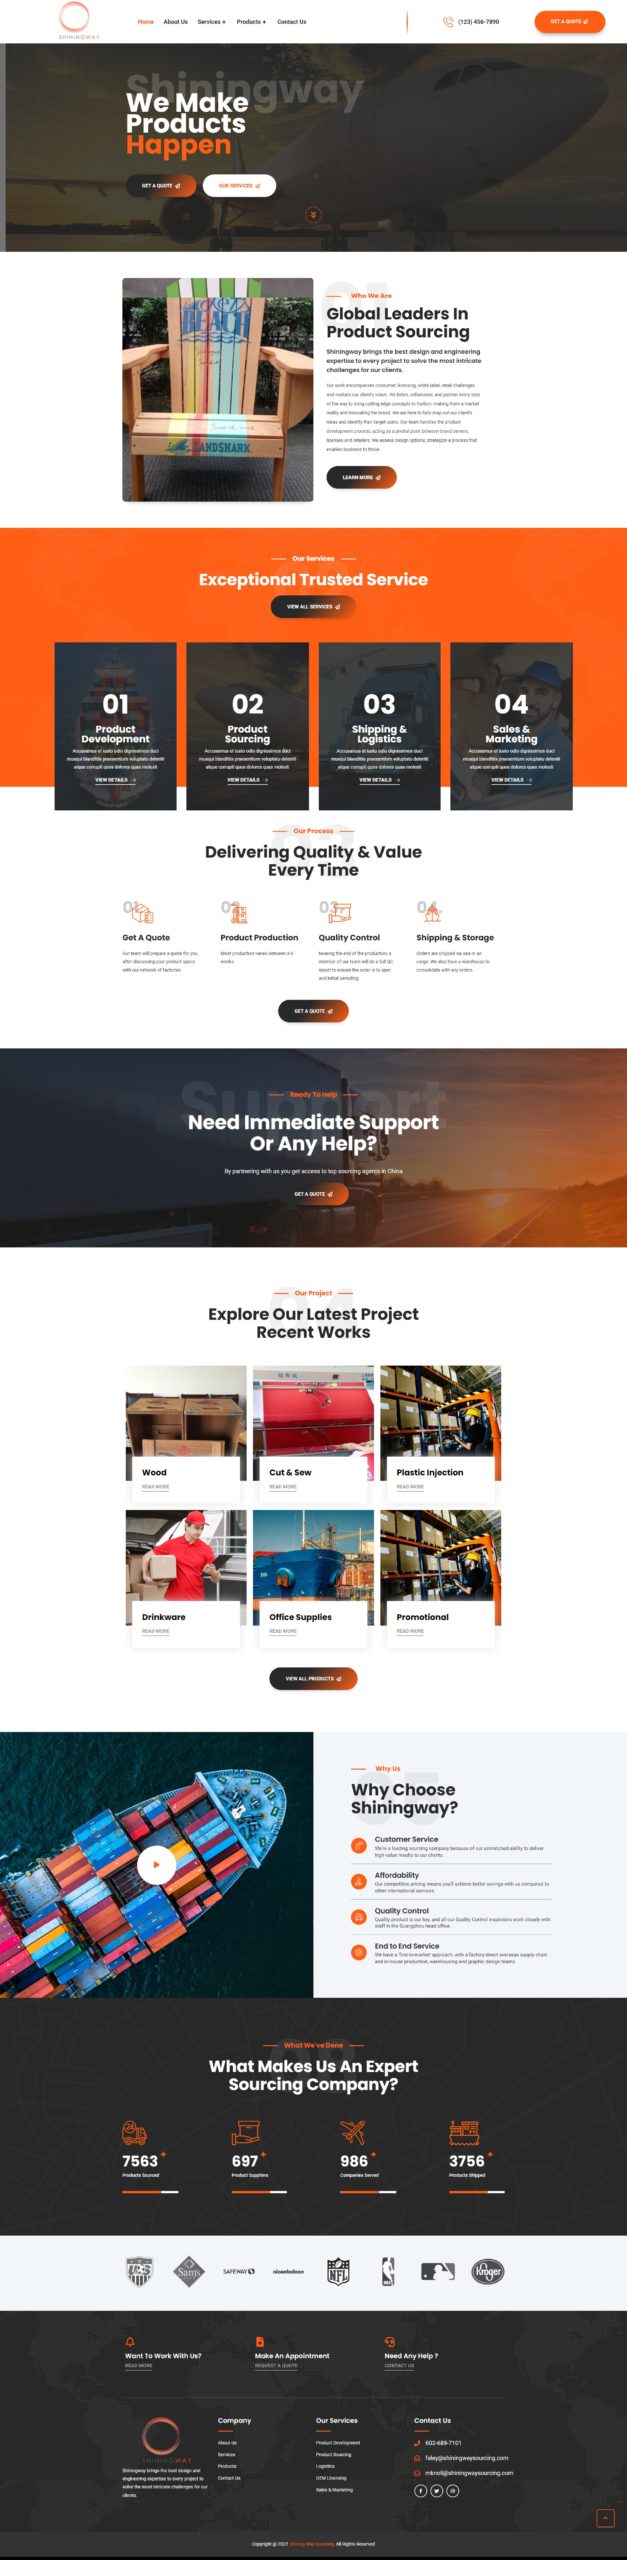 Website Redesign for Shining Way Sourcing